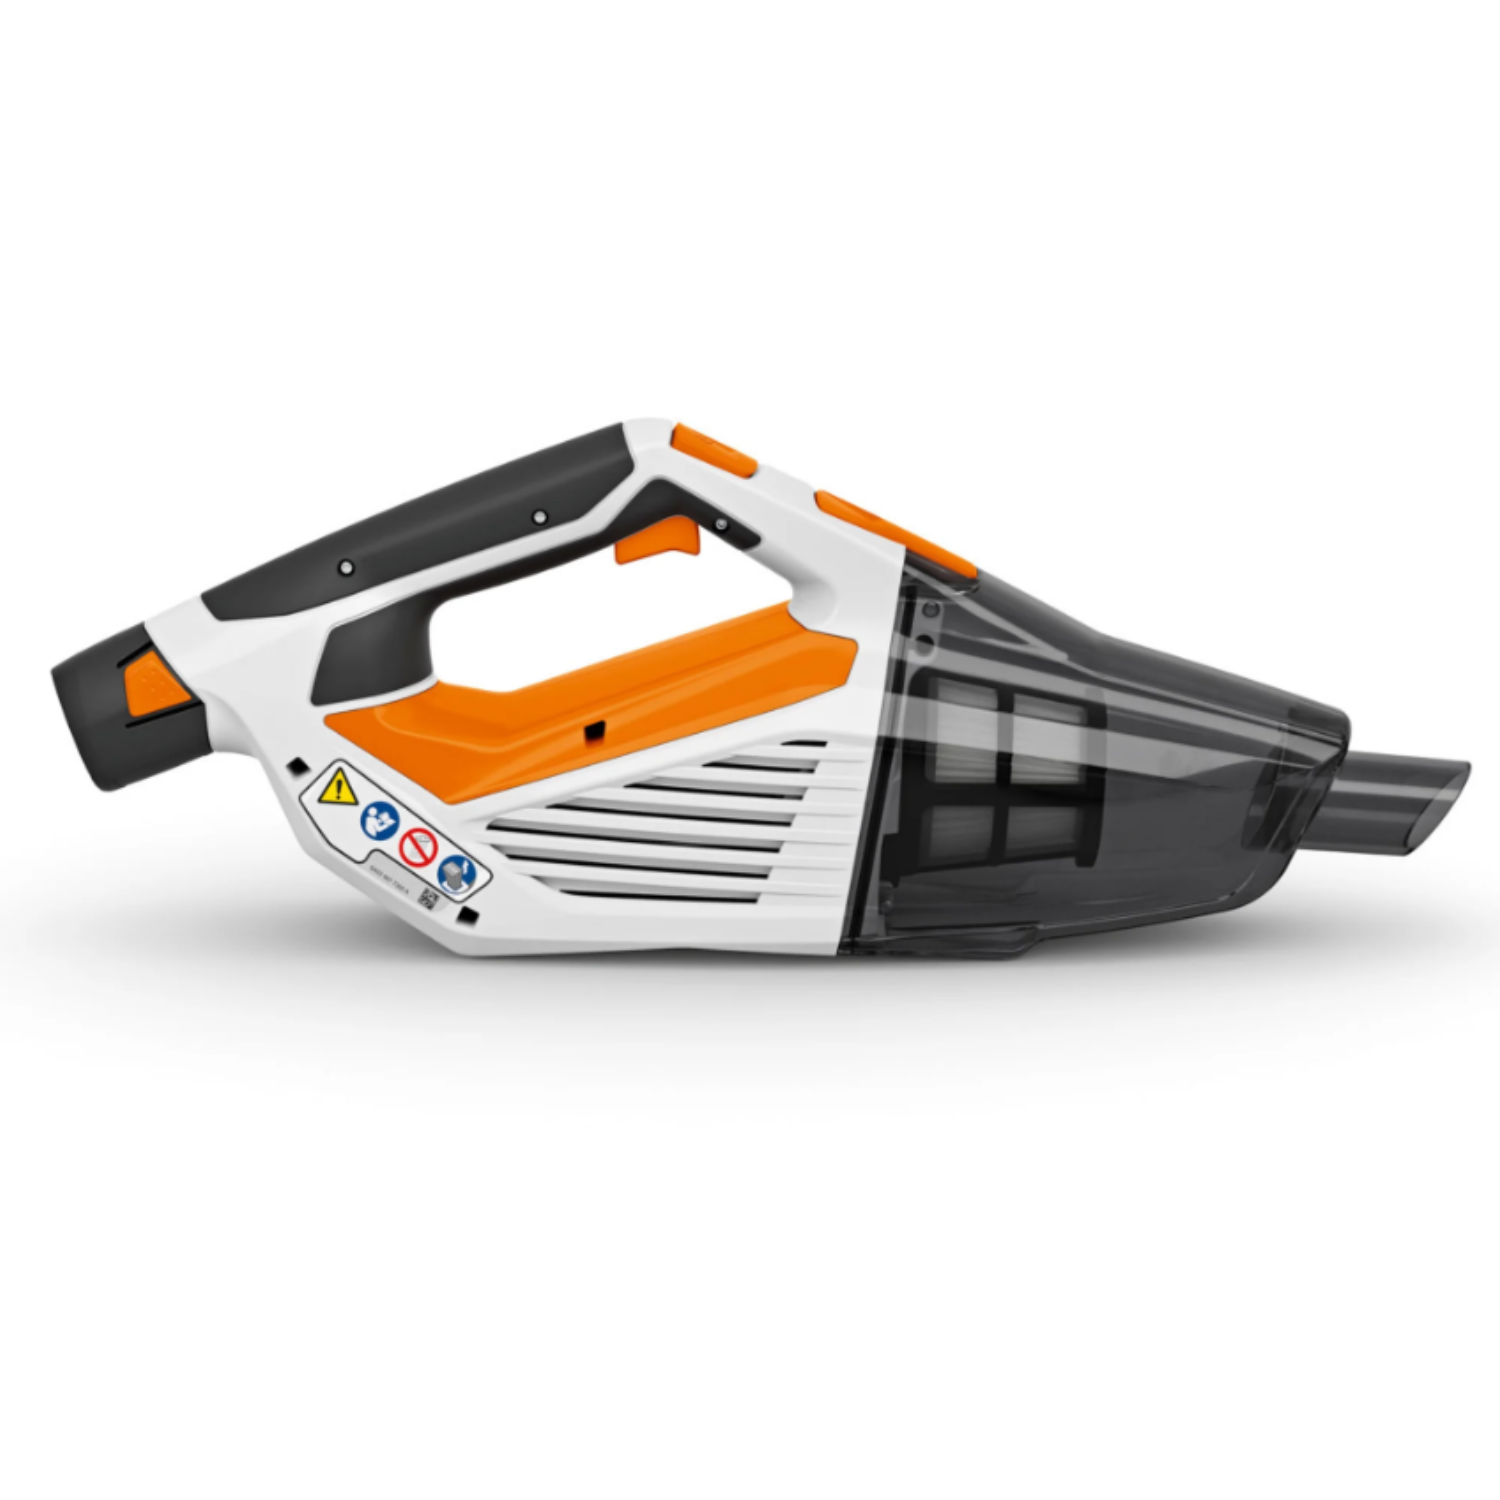 SEA 20 Handheld Battery Powered Vacuum Cleaner with Battery & Charger